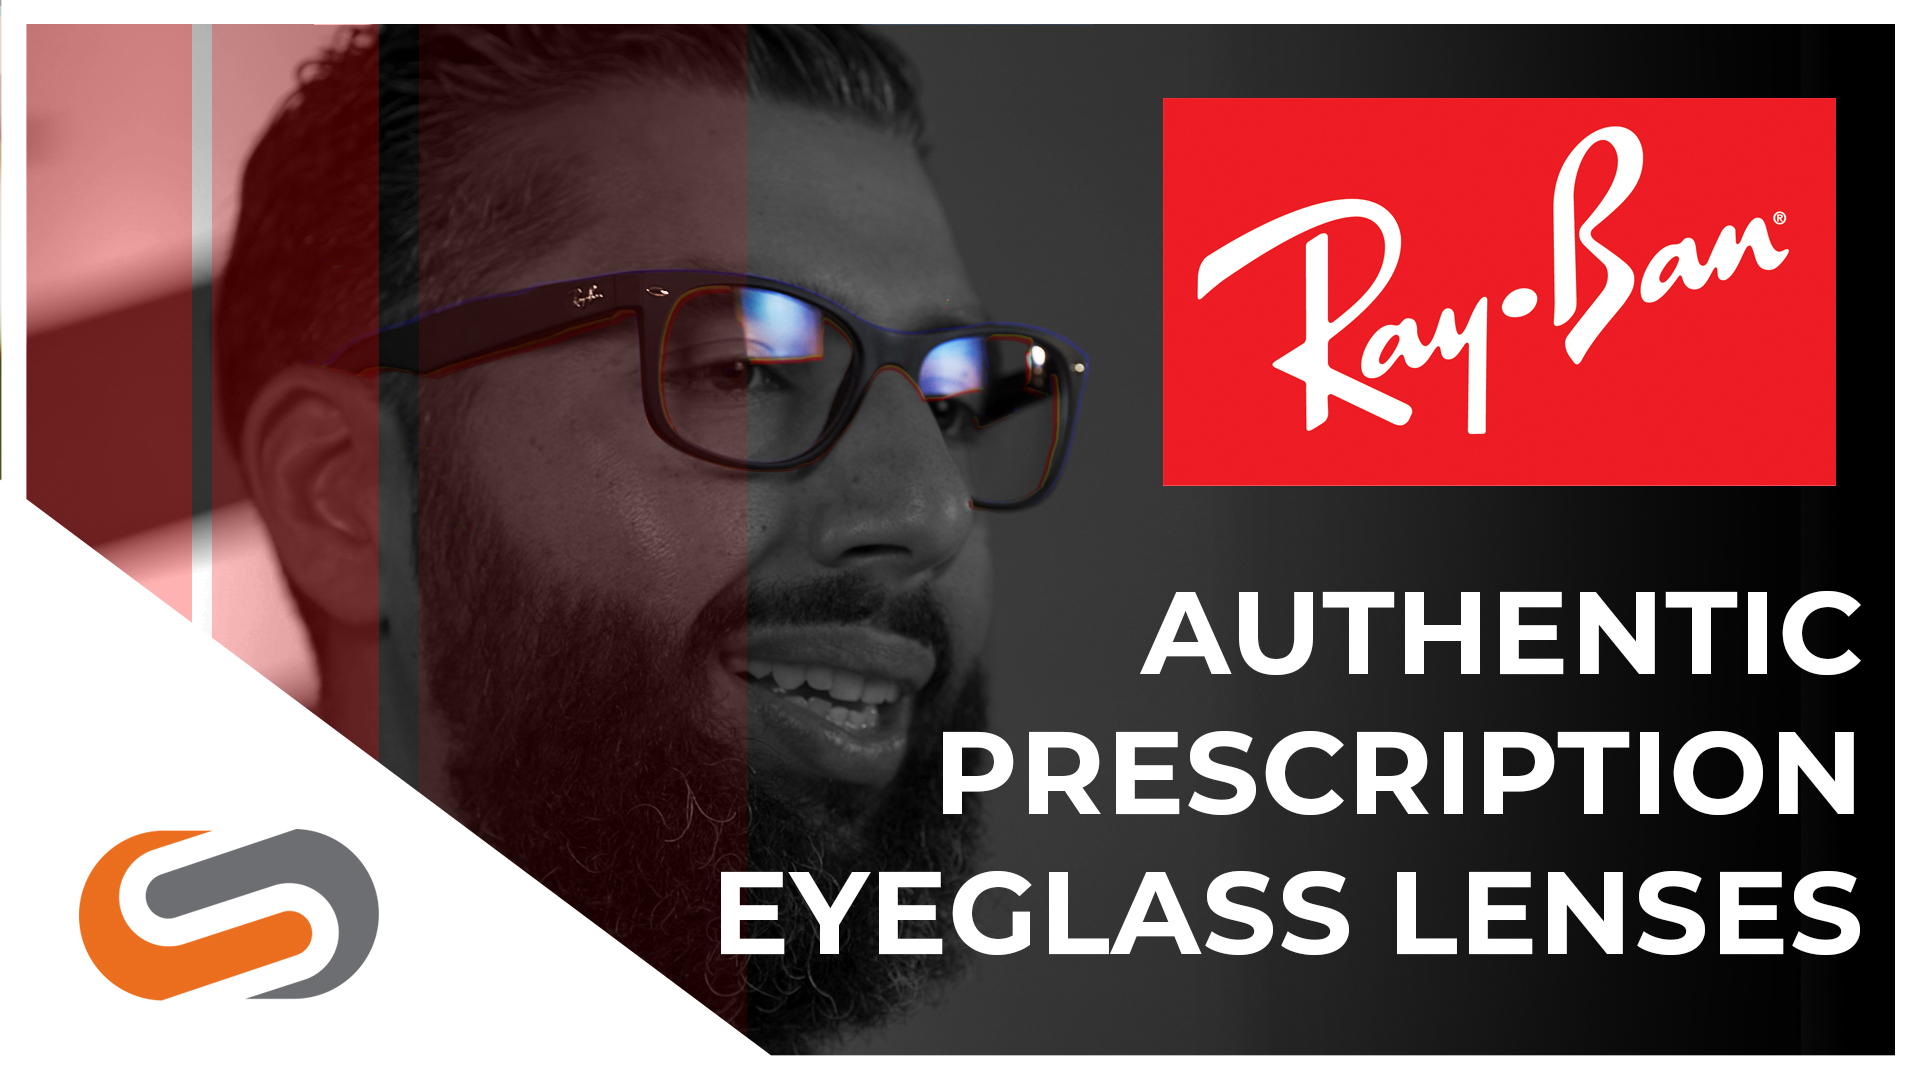 can you get ray bans with prescription lenses